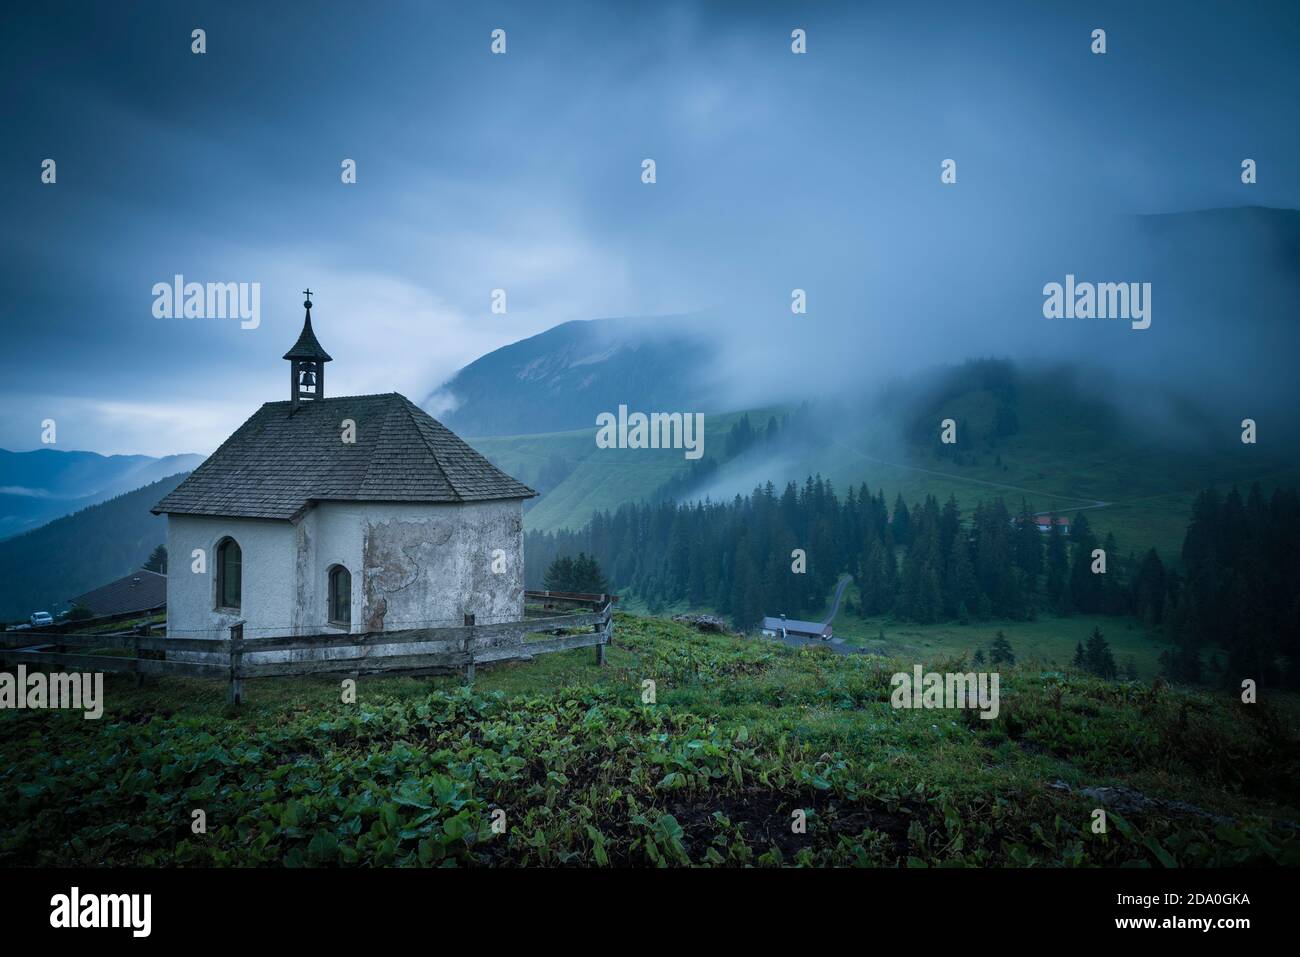 White, shingle-roofed chapel on the Ackernalm alp meadows in front of a mountain panorama with overcast sky and waves of mist, Tyrol, Austria Stock Photo